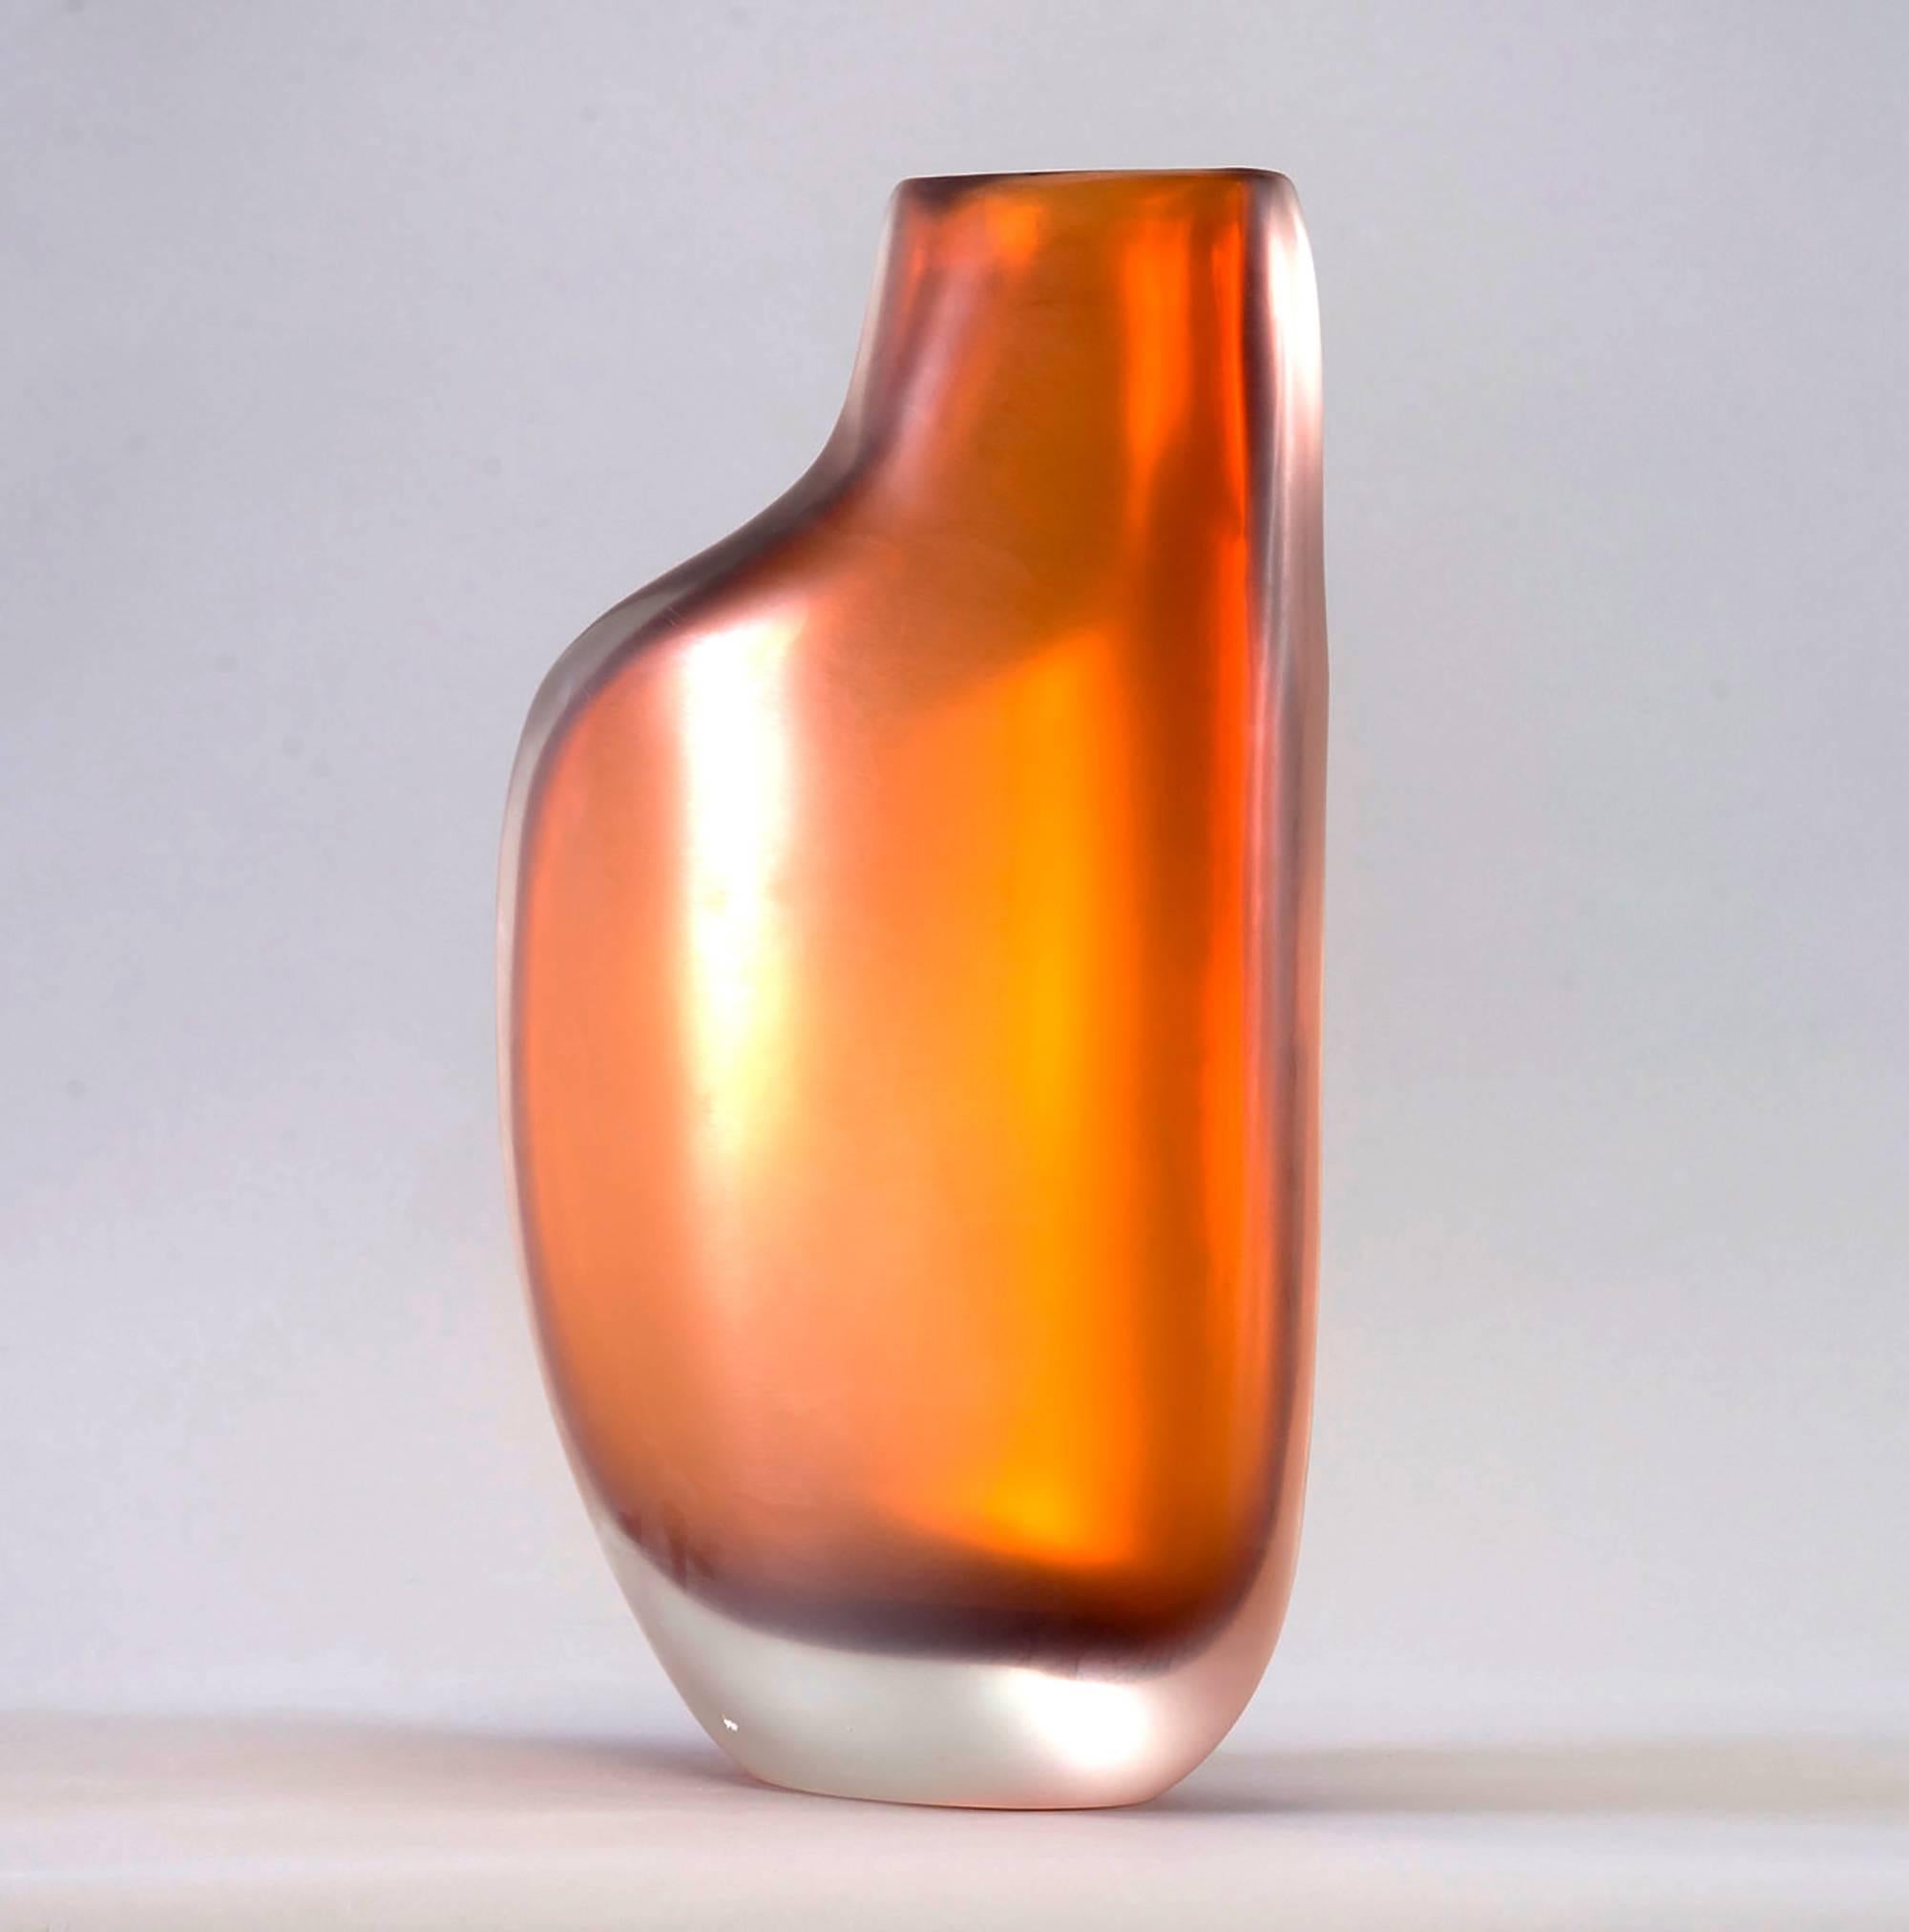 Limited edition handcrafted vase in rich amber colored cased glass, circa 2017. Designed by Ivan Baj at Arcade, this piece has a sensual biomorphic shape and is signed by the artist and numbered 24 of 33. New condition with no flaws found.